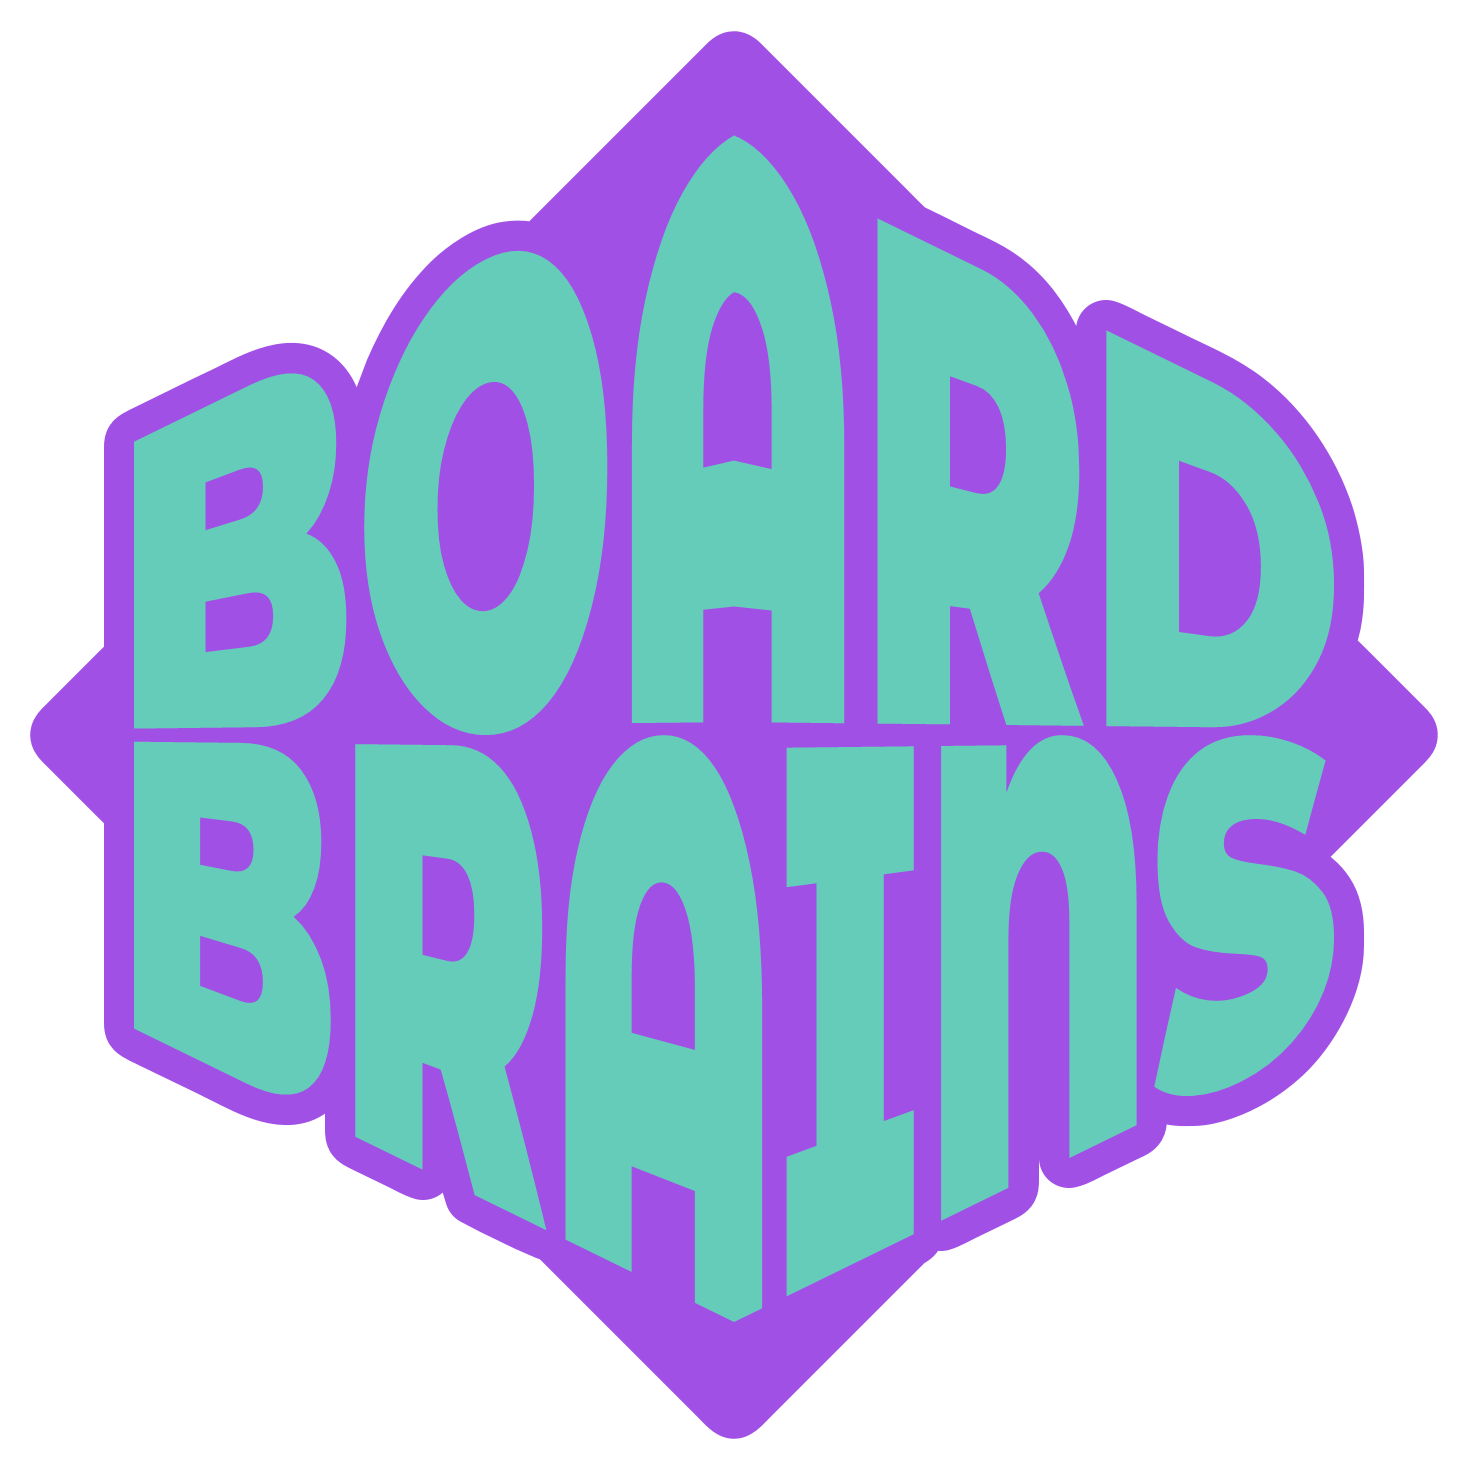 The second official Board Brains logo.  It features larger text saying Board Brains over a squashed diamond.